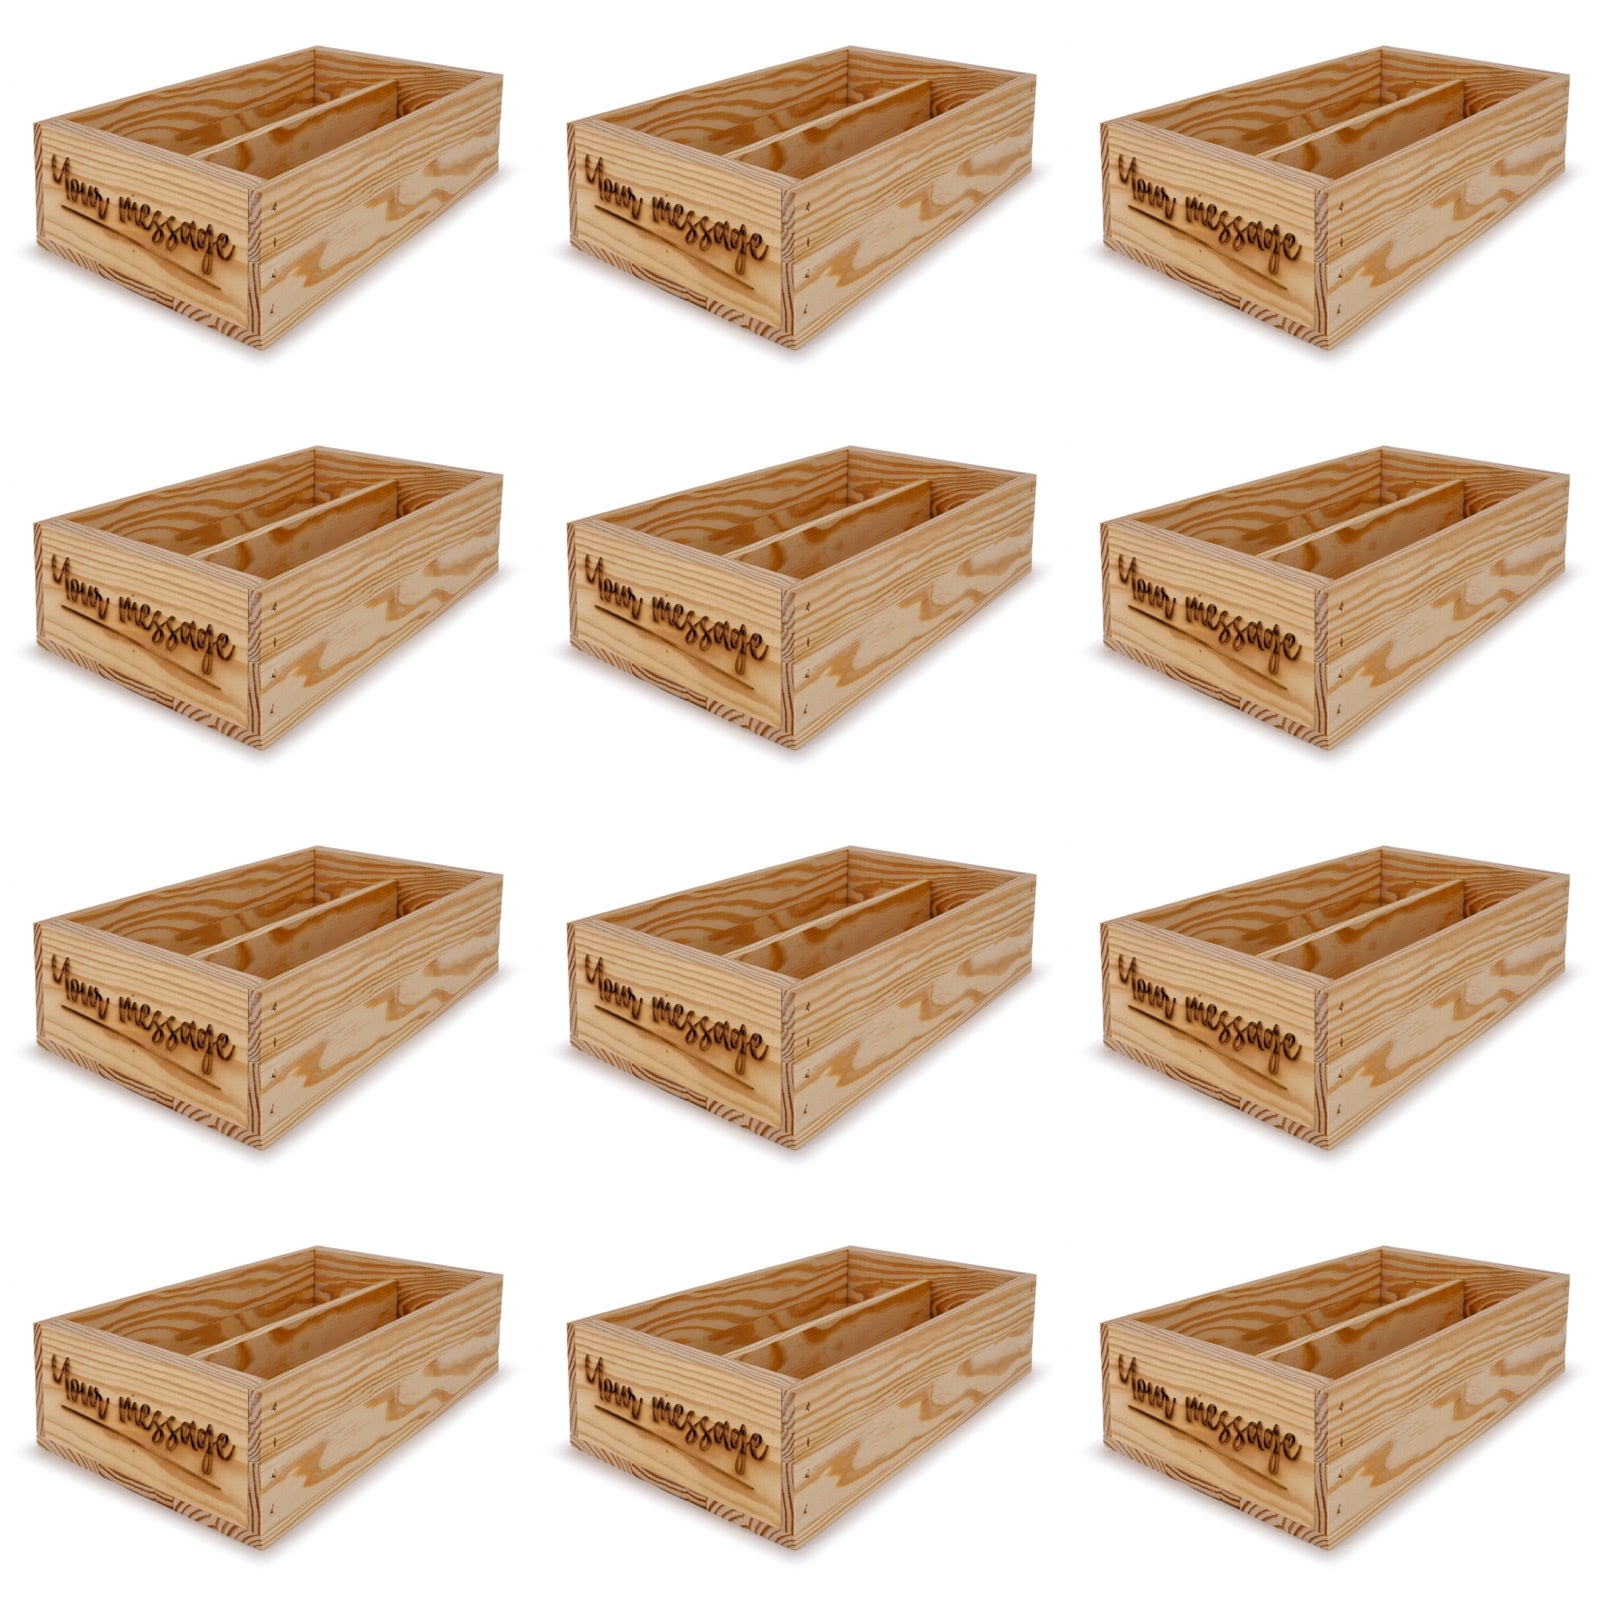 12-2 Bottle wine crates with custom message 13x7.5x3.5